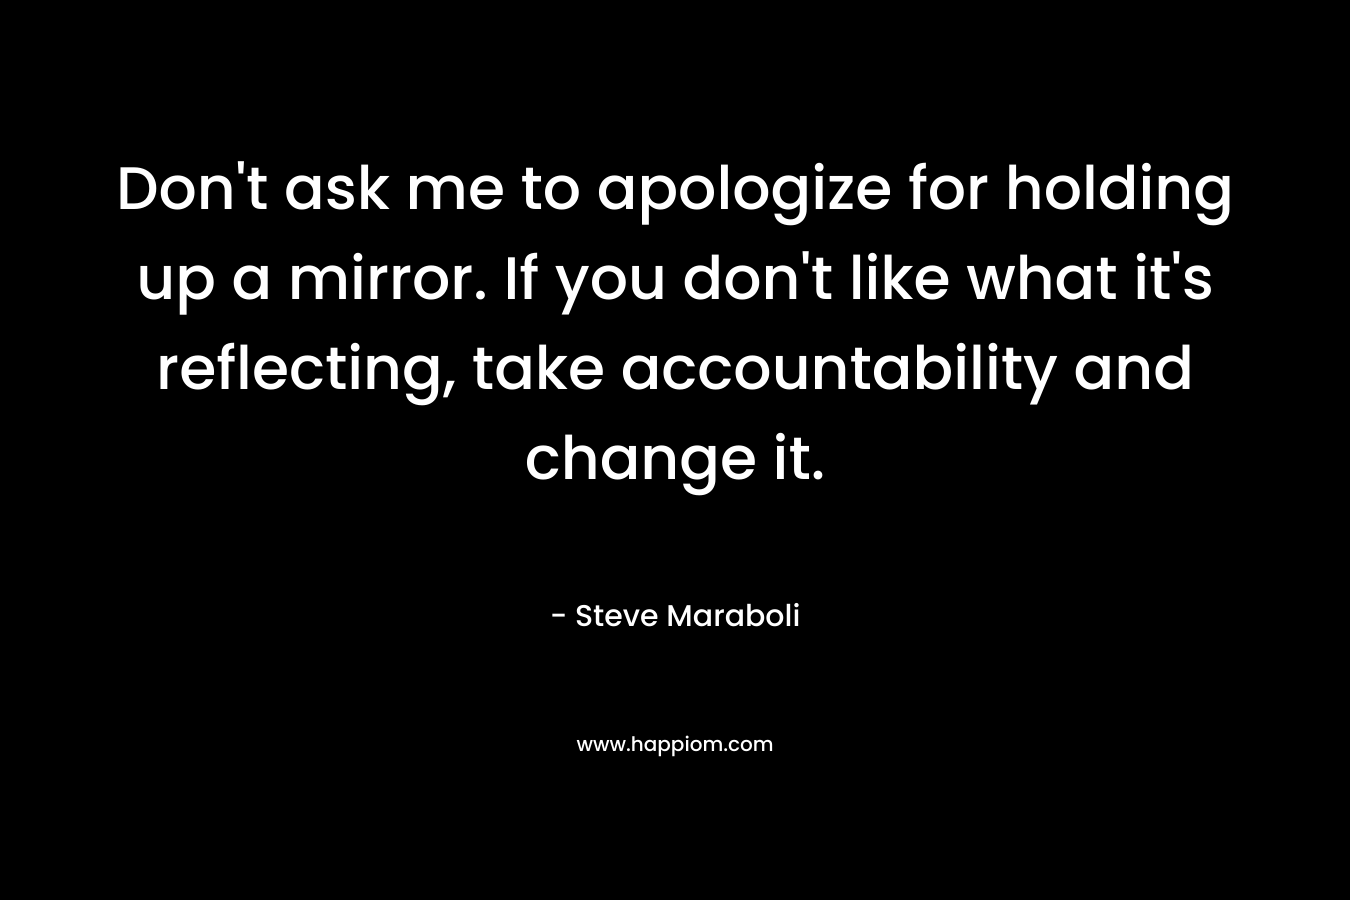 Don't ask me to apologize for holding up a mirror. If you don't like what it's reflecting, take accountability and change it.